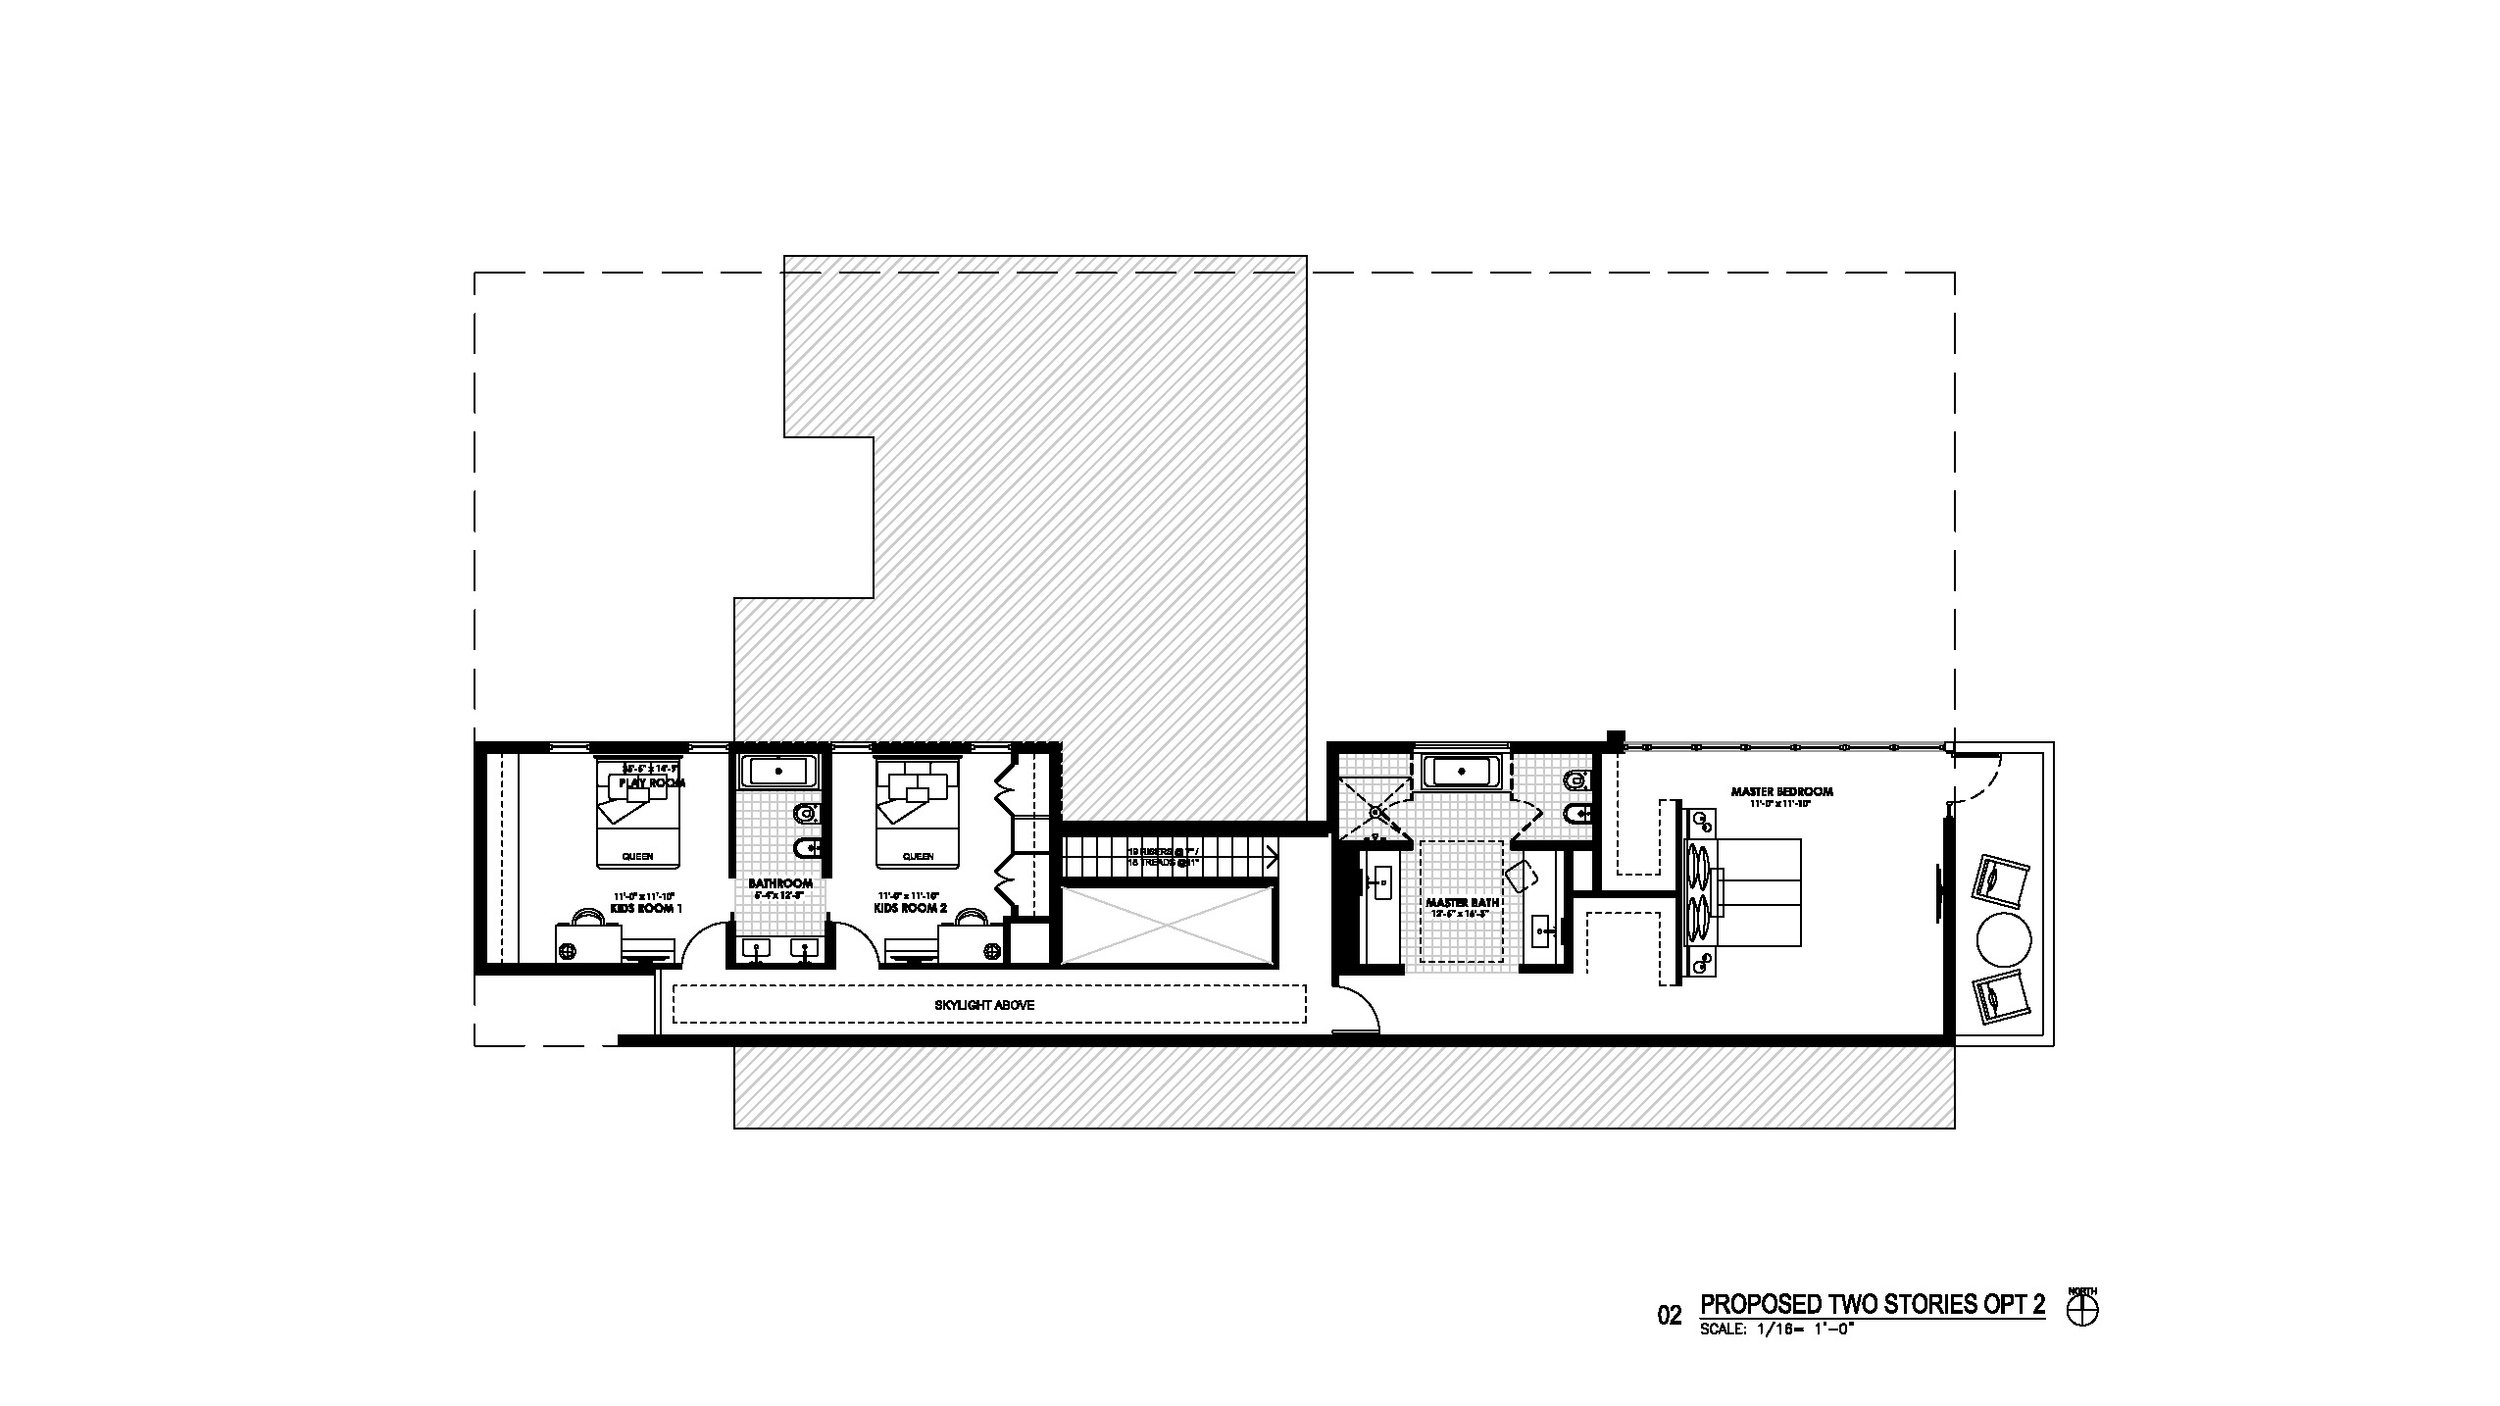 proposed two stories opt 2 - second floor